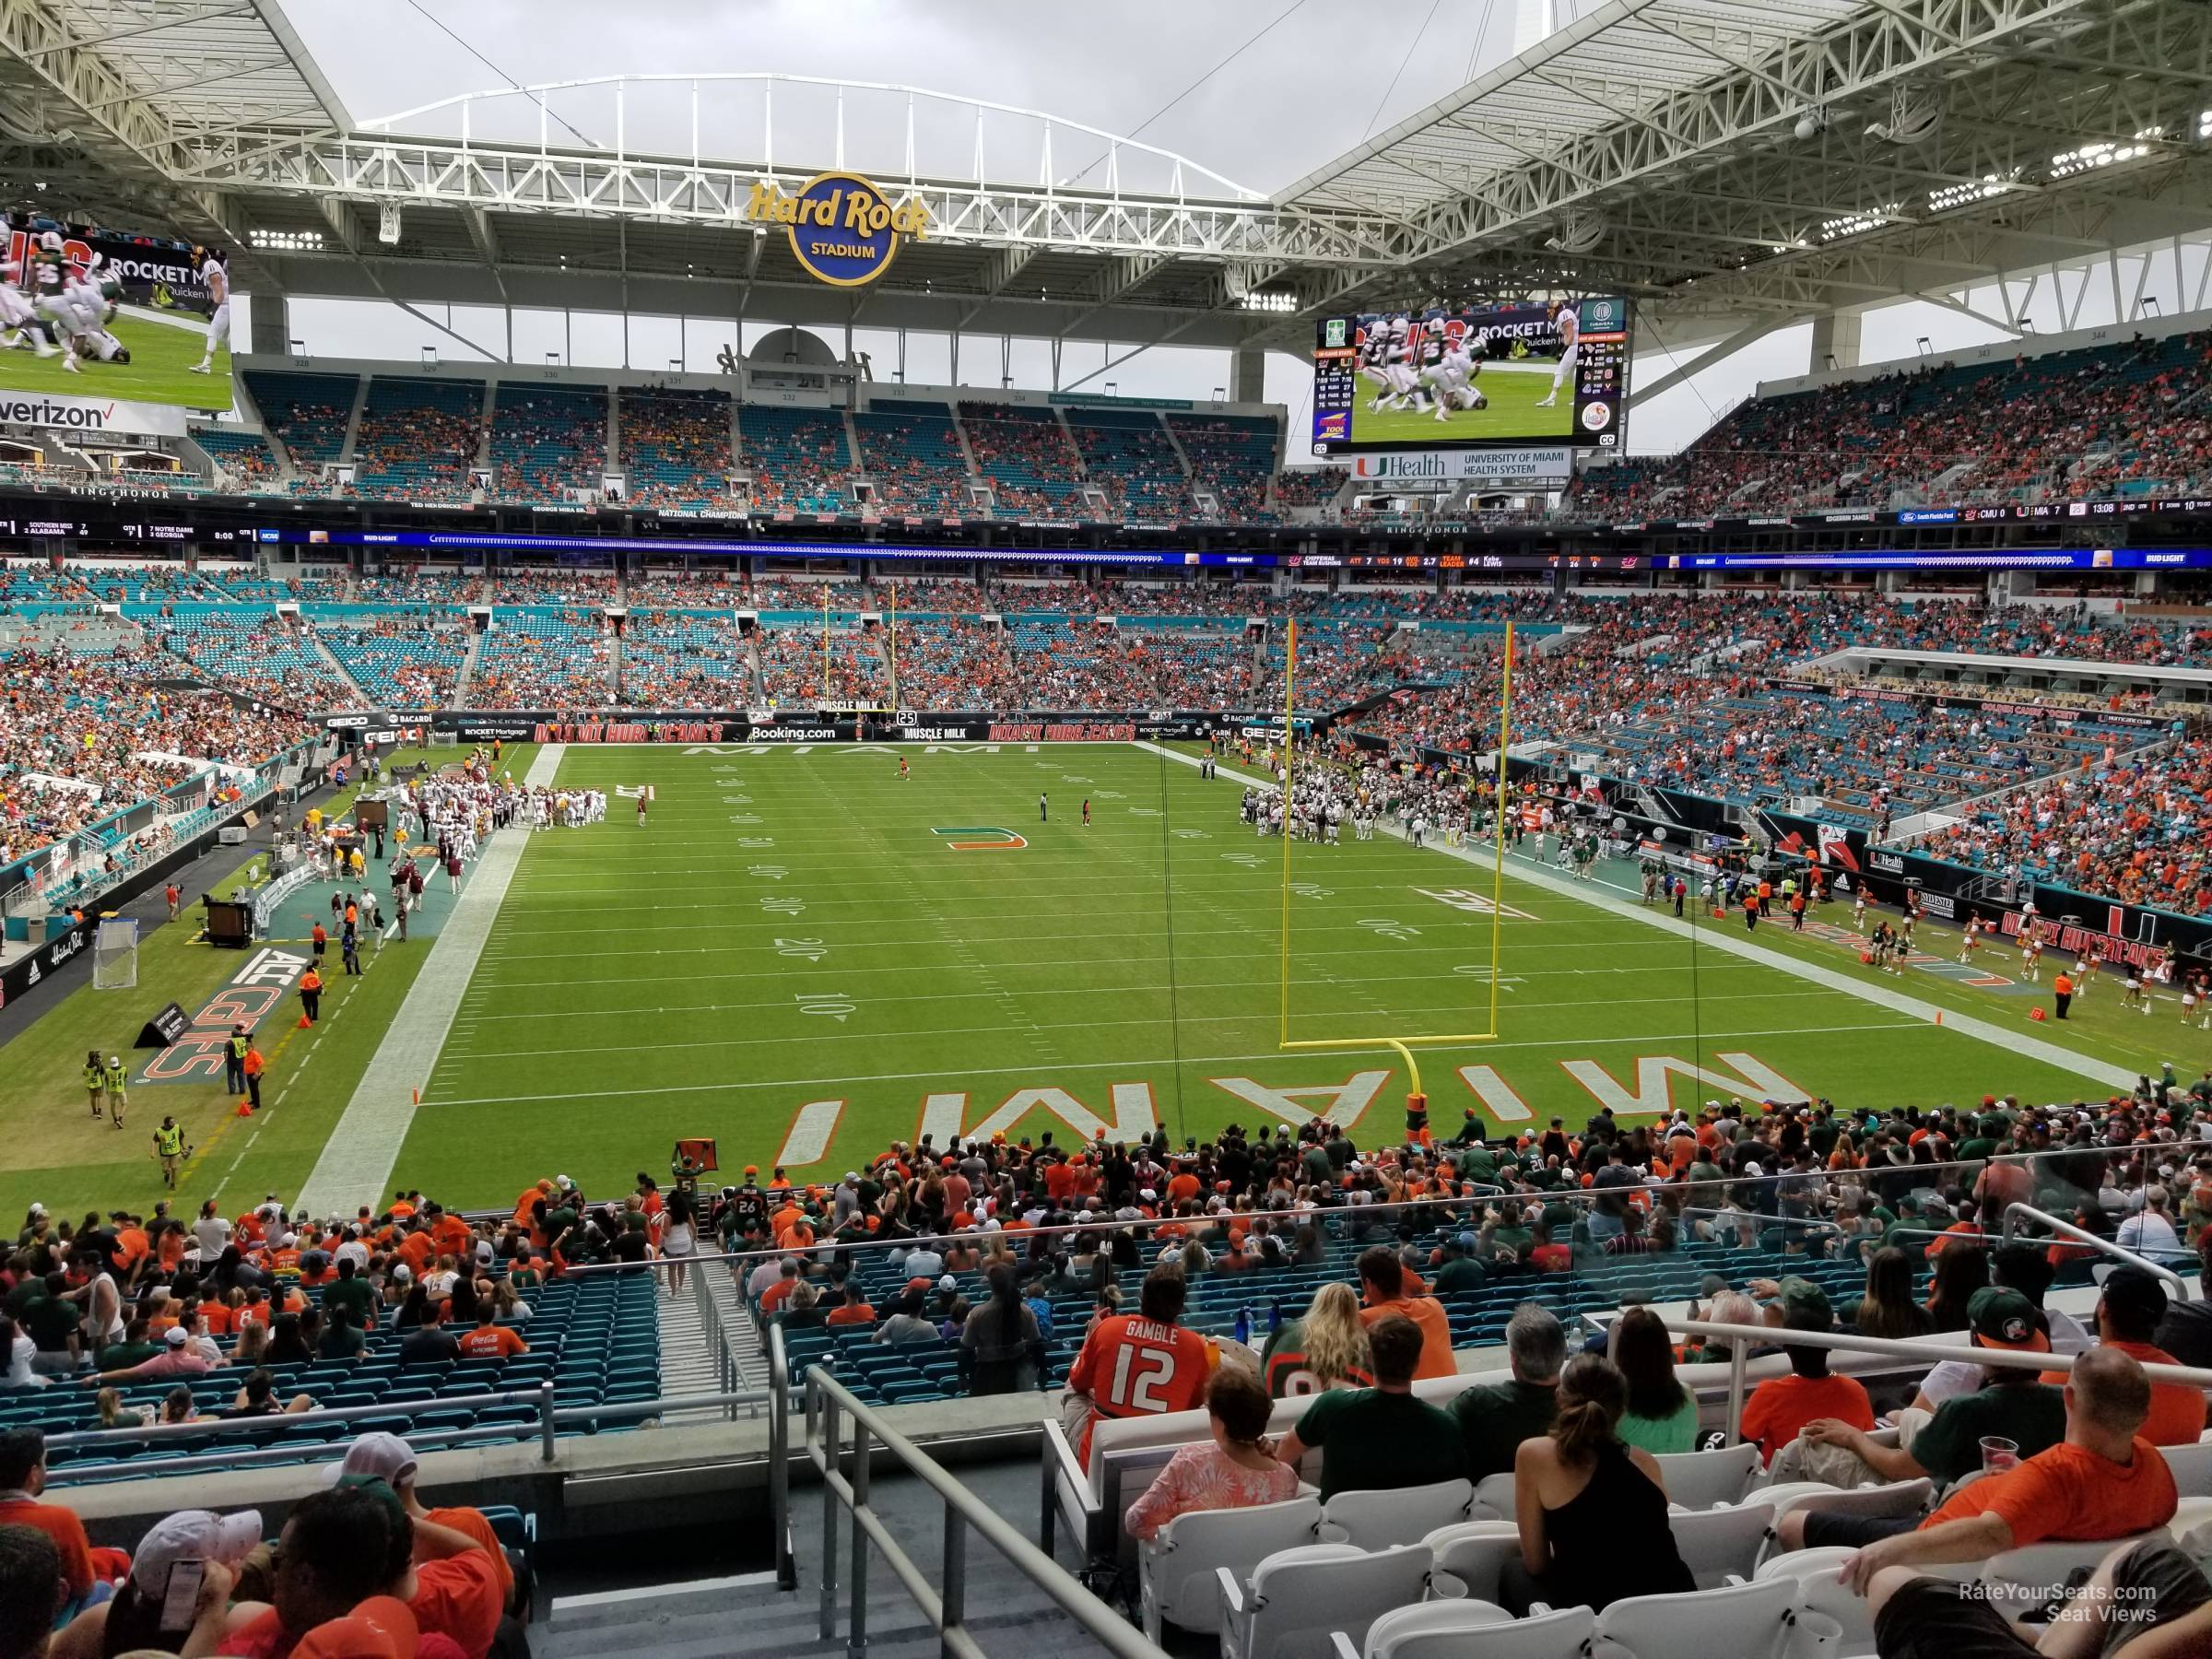 section 206, row 10 seat view  for football - hard rock stadium